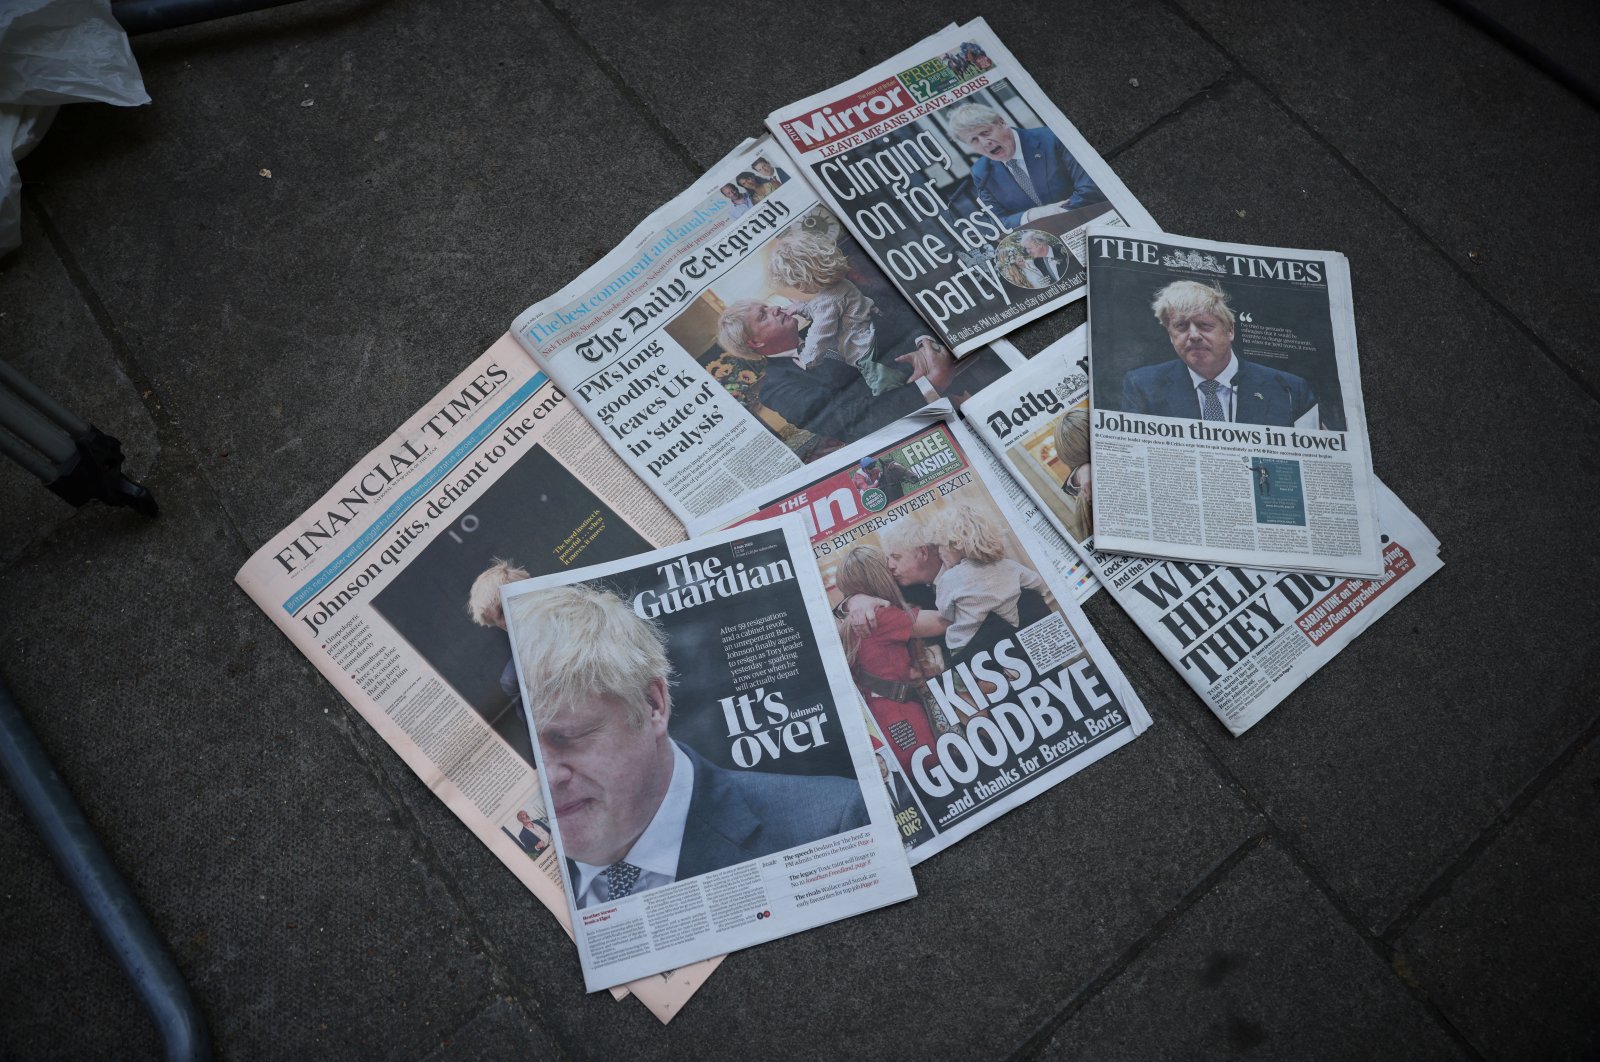 Newspapers reporting the resignation of Boris Johnson are seen on the floor at Downing Street in London, Britain, July 8, 2022. (Reuters Photo)